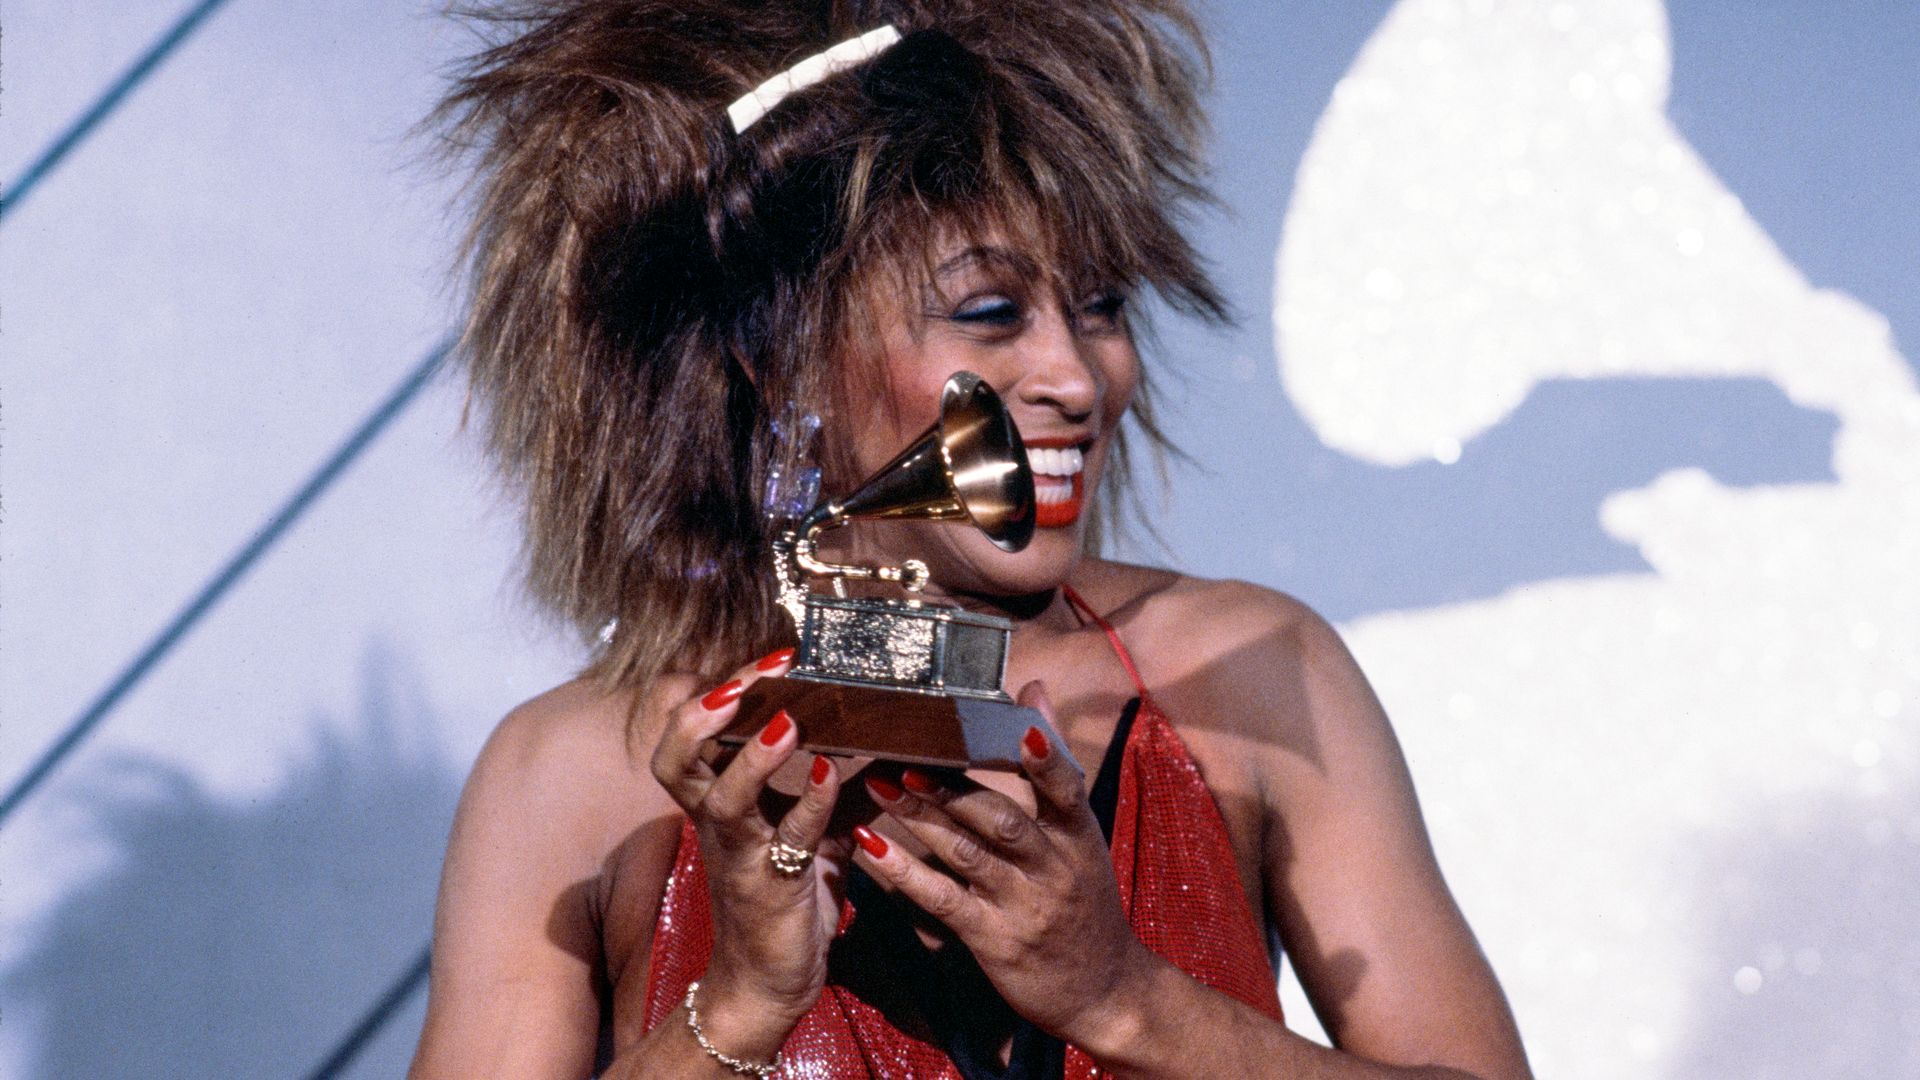 Tina Turner at the 27th Annual Grammy Awards, 1985